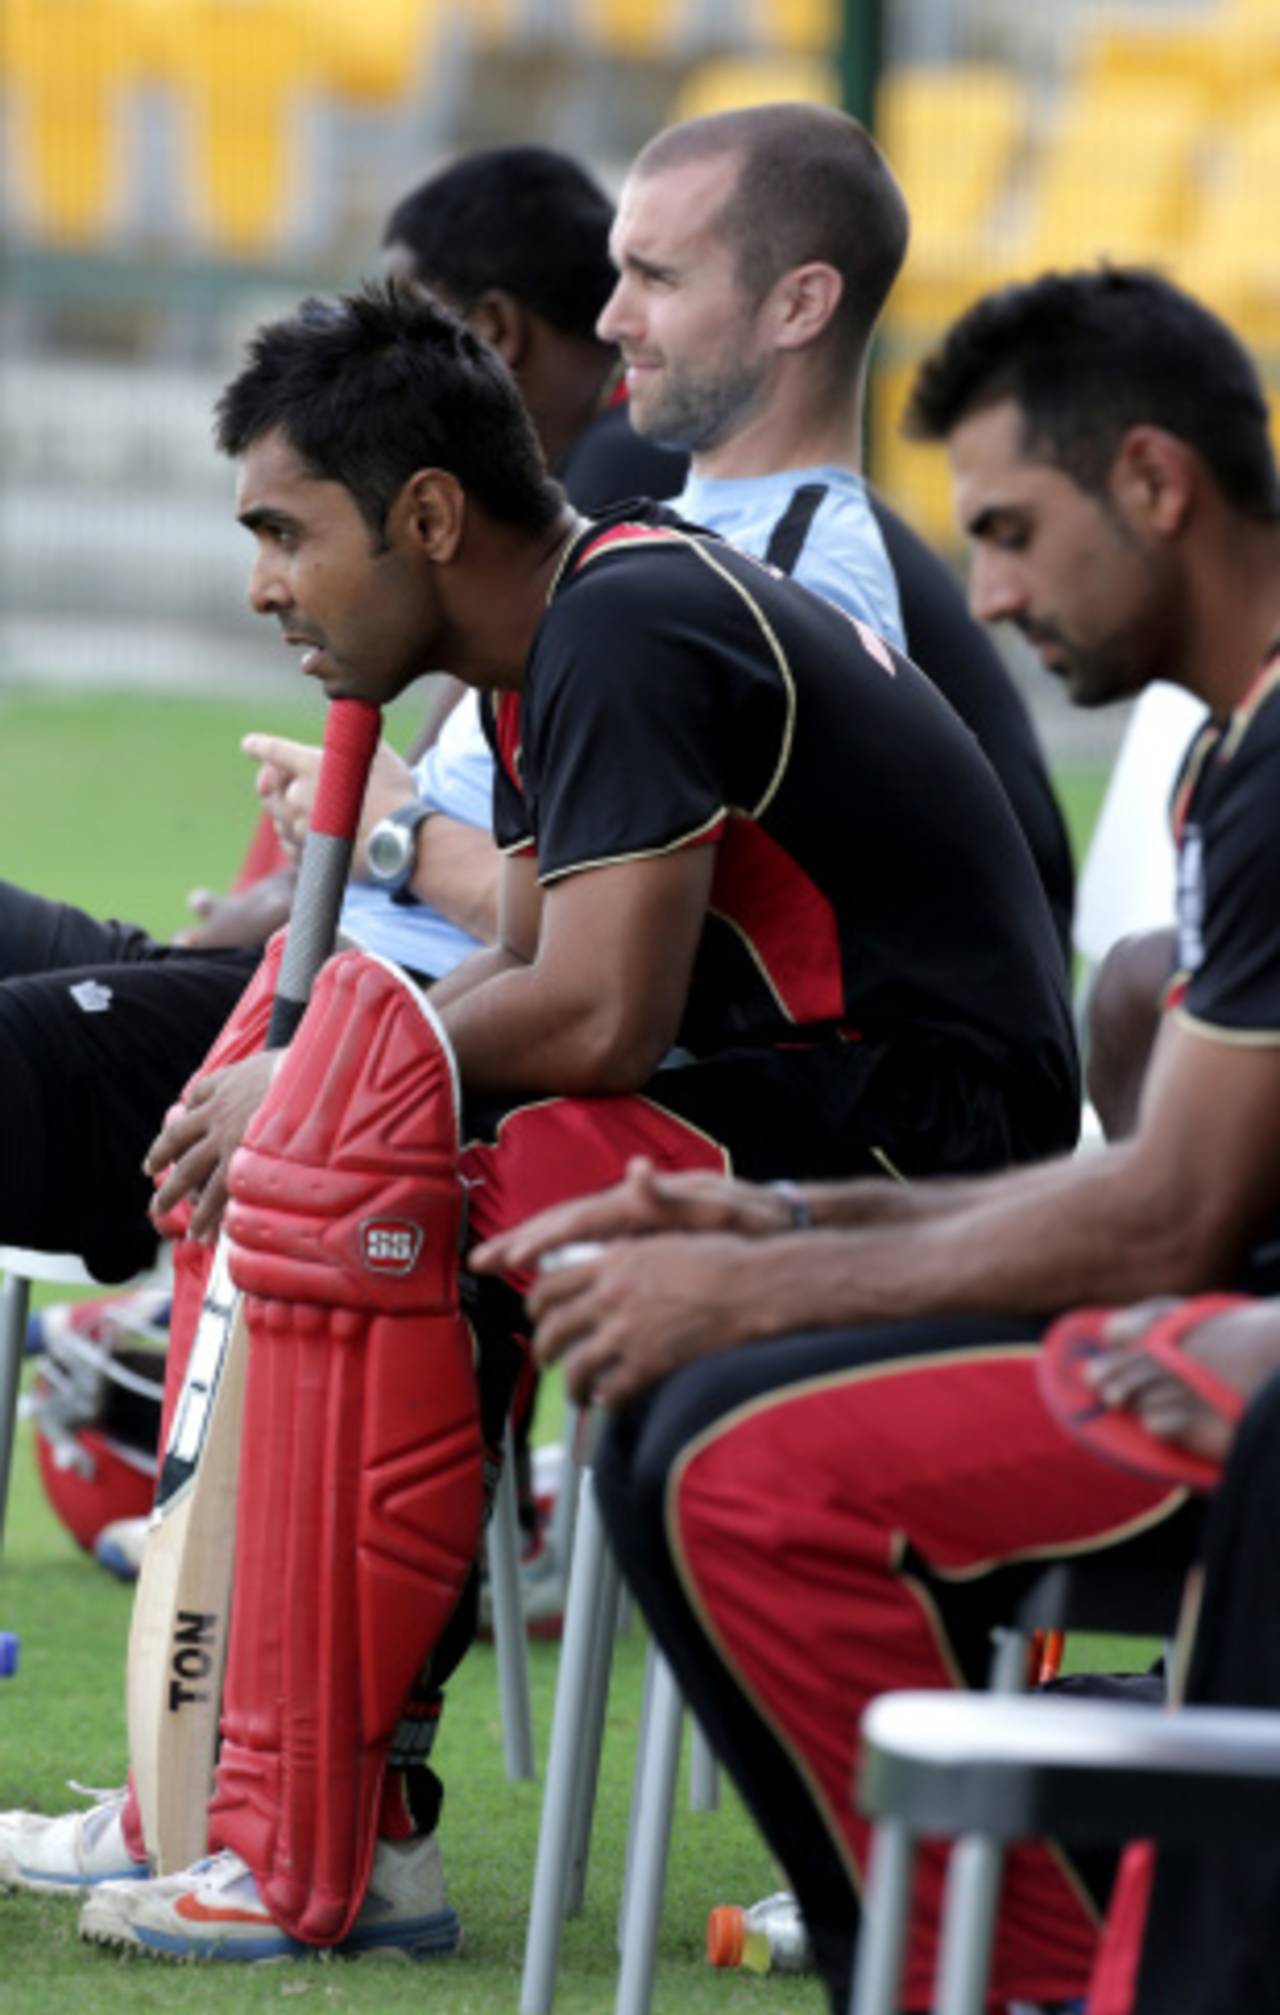 Canada's captain Ashish Bagai watches the match from the bench, Canada v Italy, ICC World Twenty20 Qualifier, Group A, Abu Dhabi, November 24, 2013